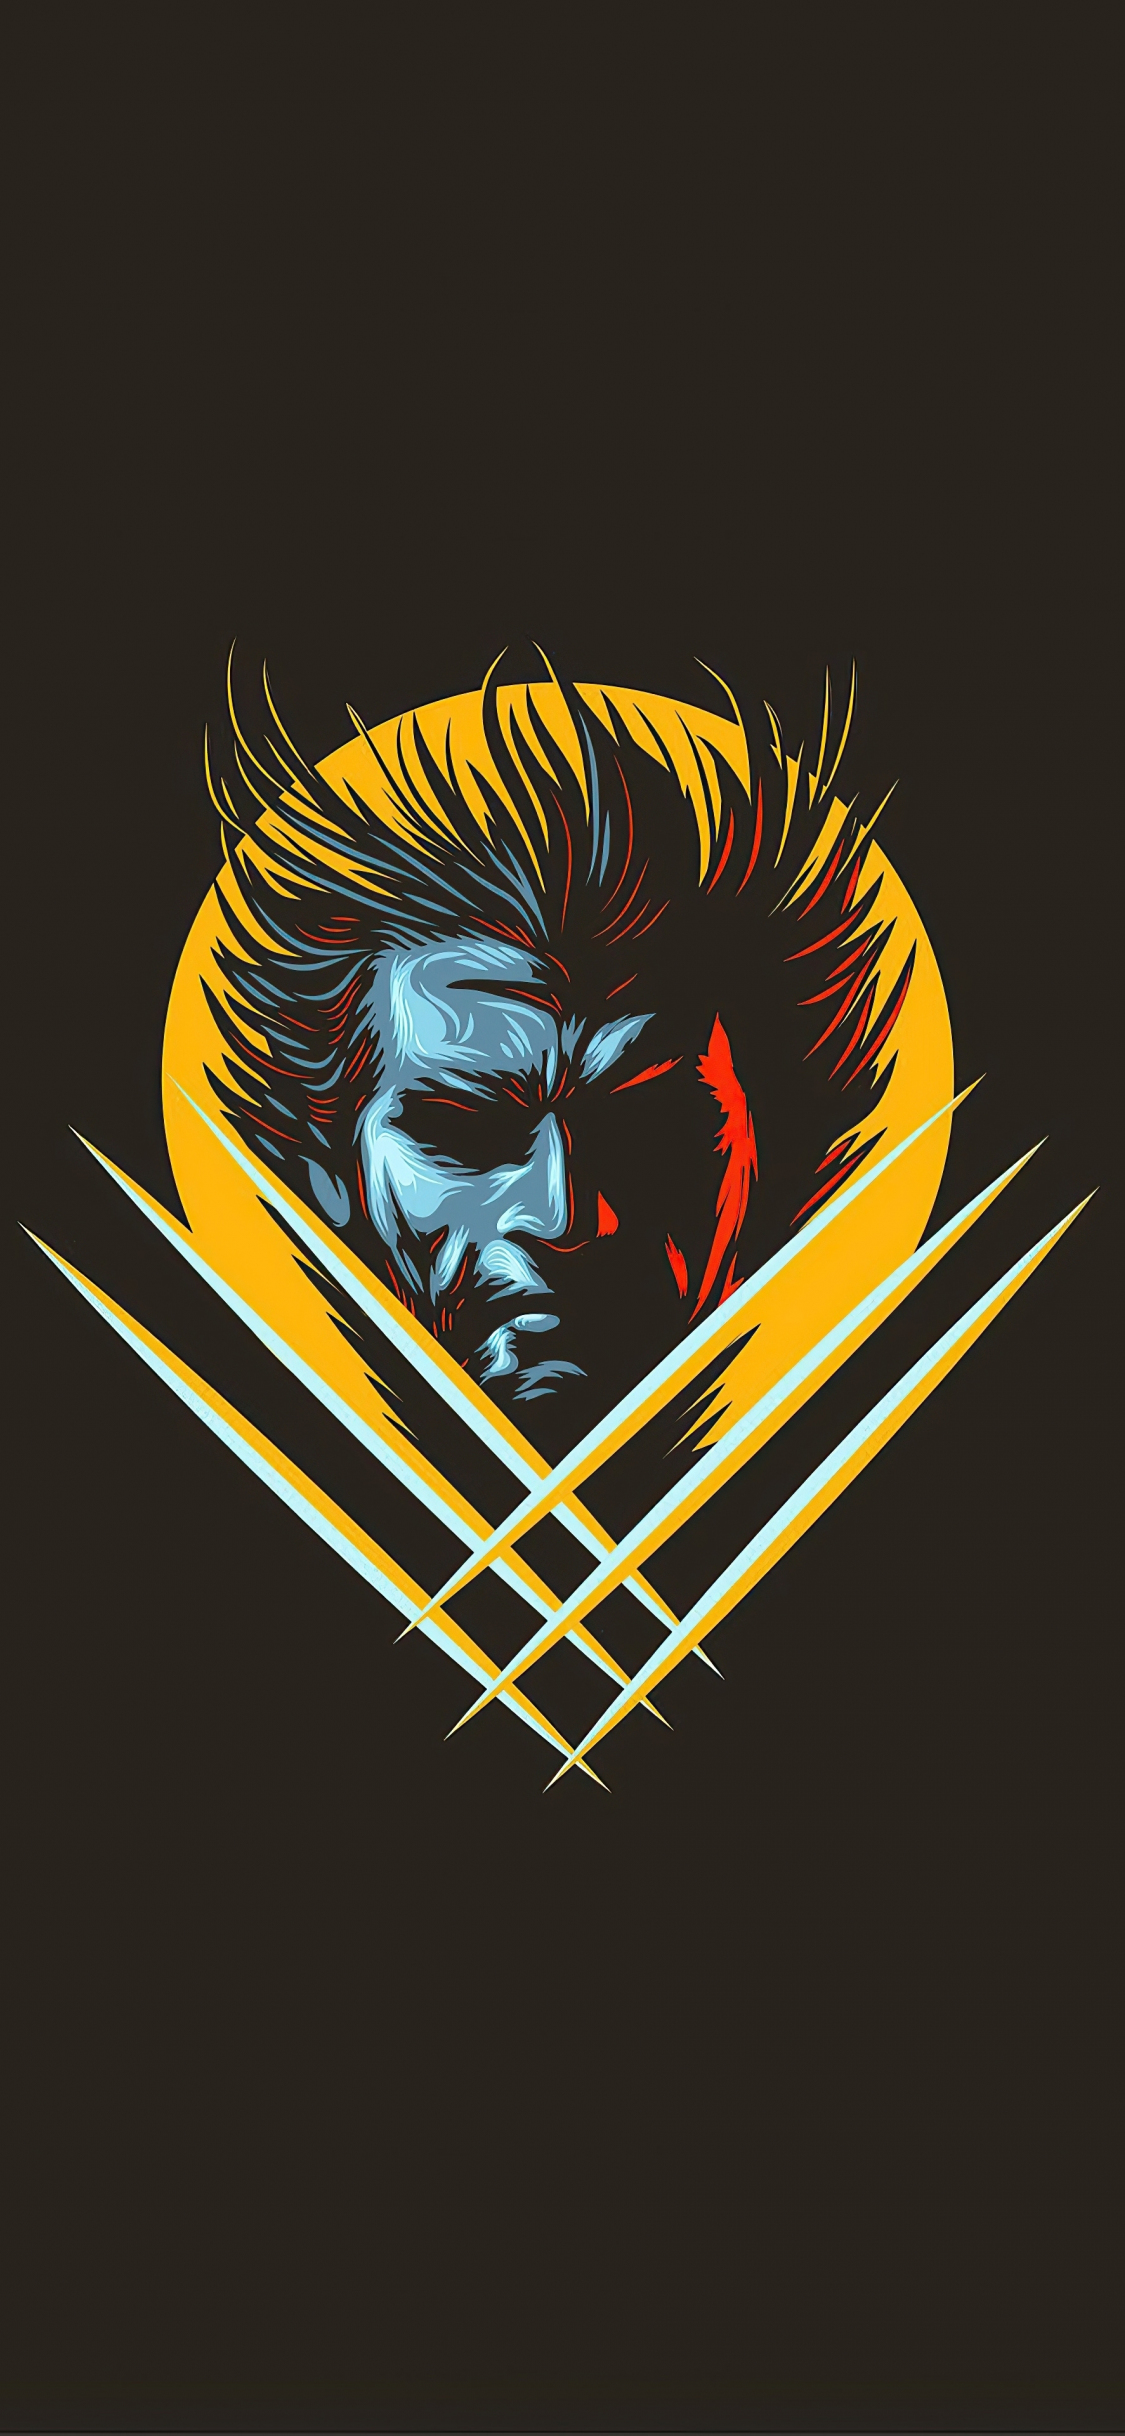 Download Wolverine Claws X Men 1125x2436 Wallpaper Iphone X 1125x2436 Hd Image Background